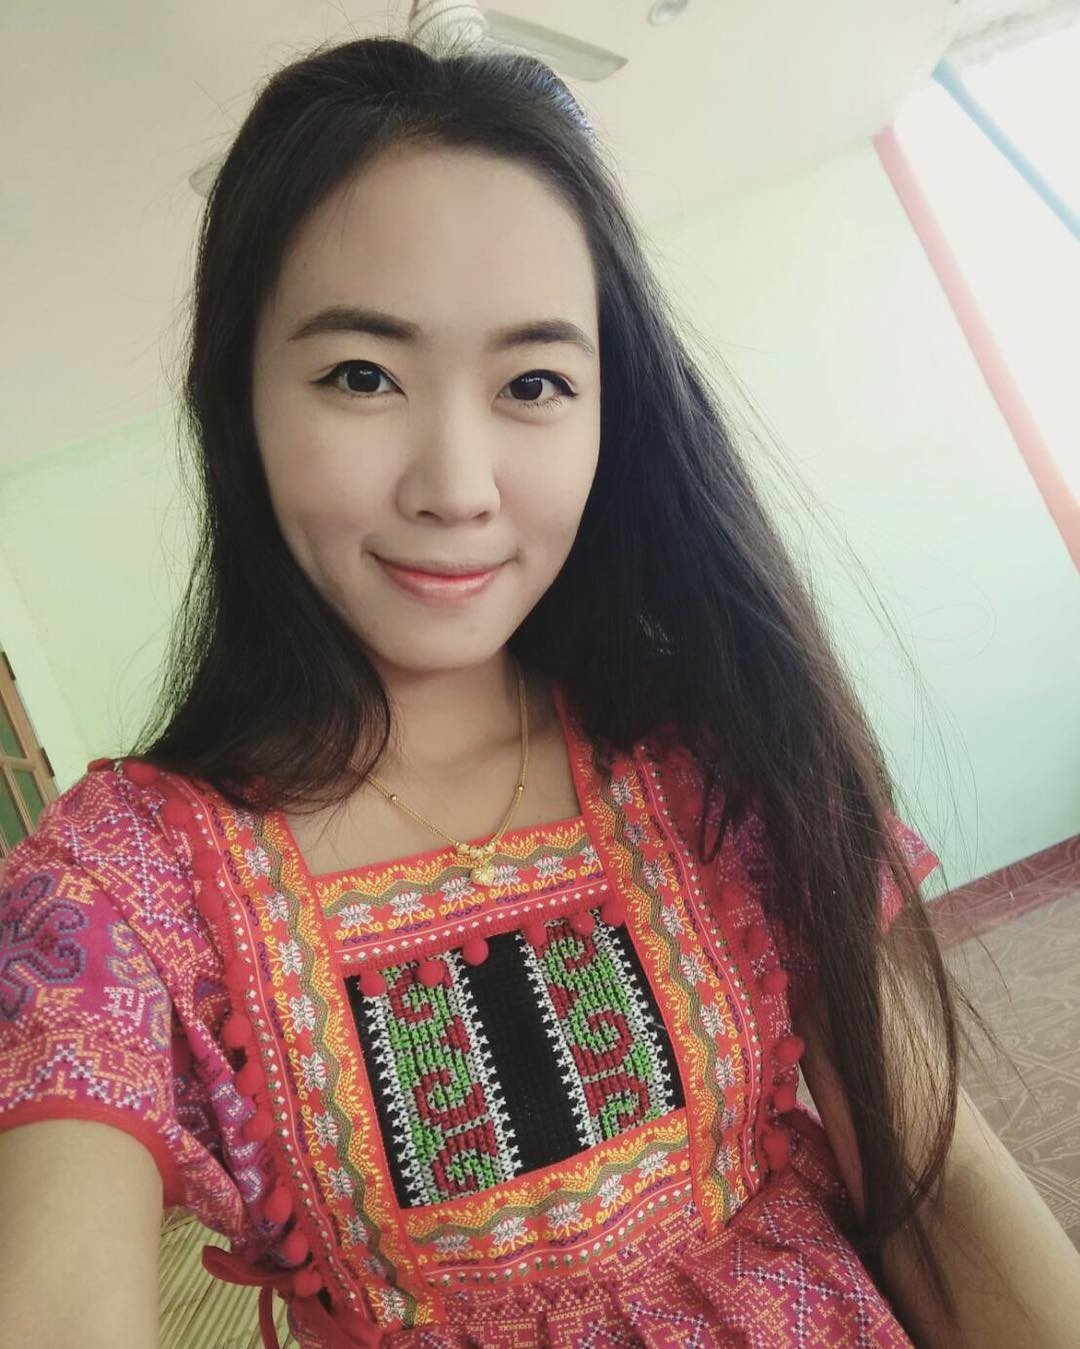 Watch the Photo by Your Thai Toy :) with the username @tabbycatasian, posted on April 29, 2019. The post is about the topic Thai. and the text says 'Traditional Thai Girl <3'